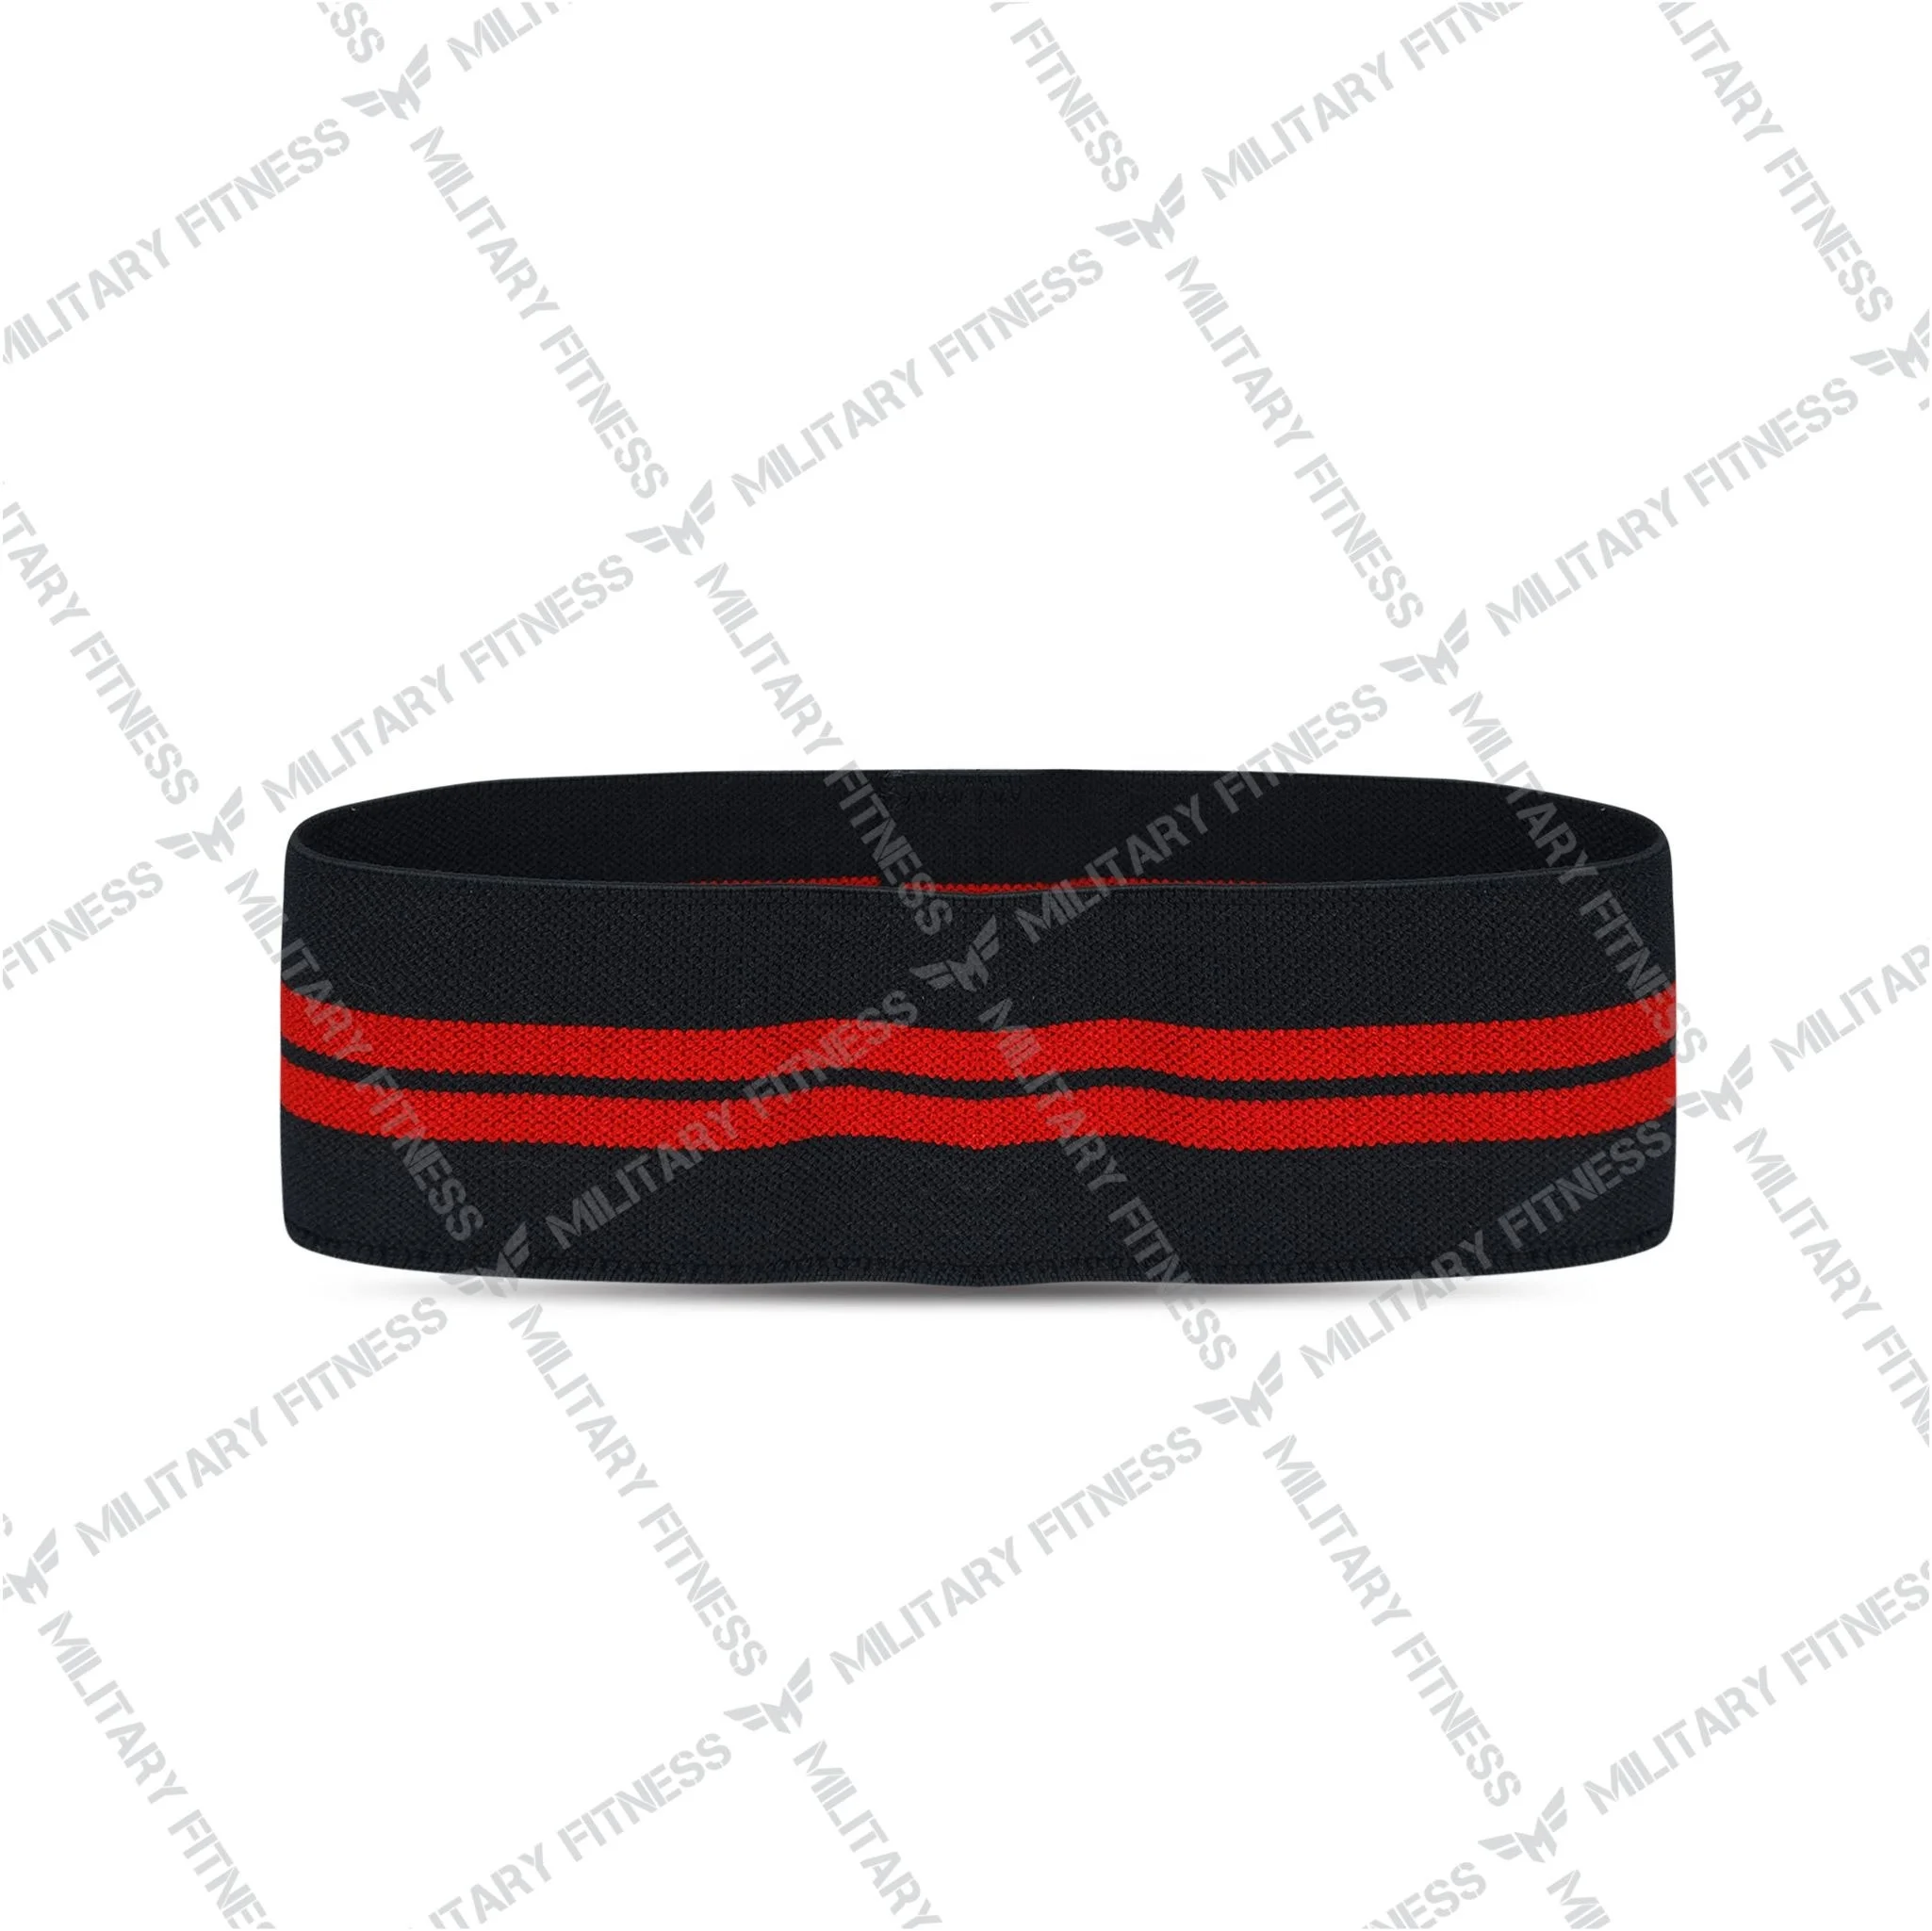 glute resistance hip band stretch hip band legs and arms